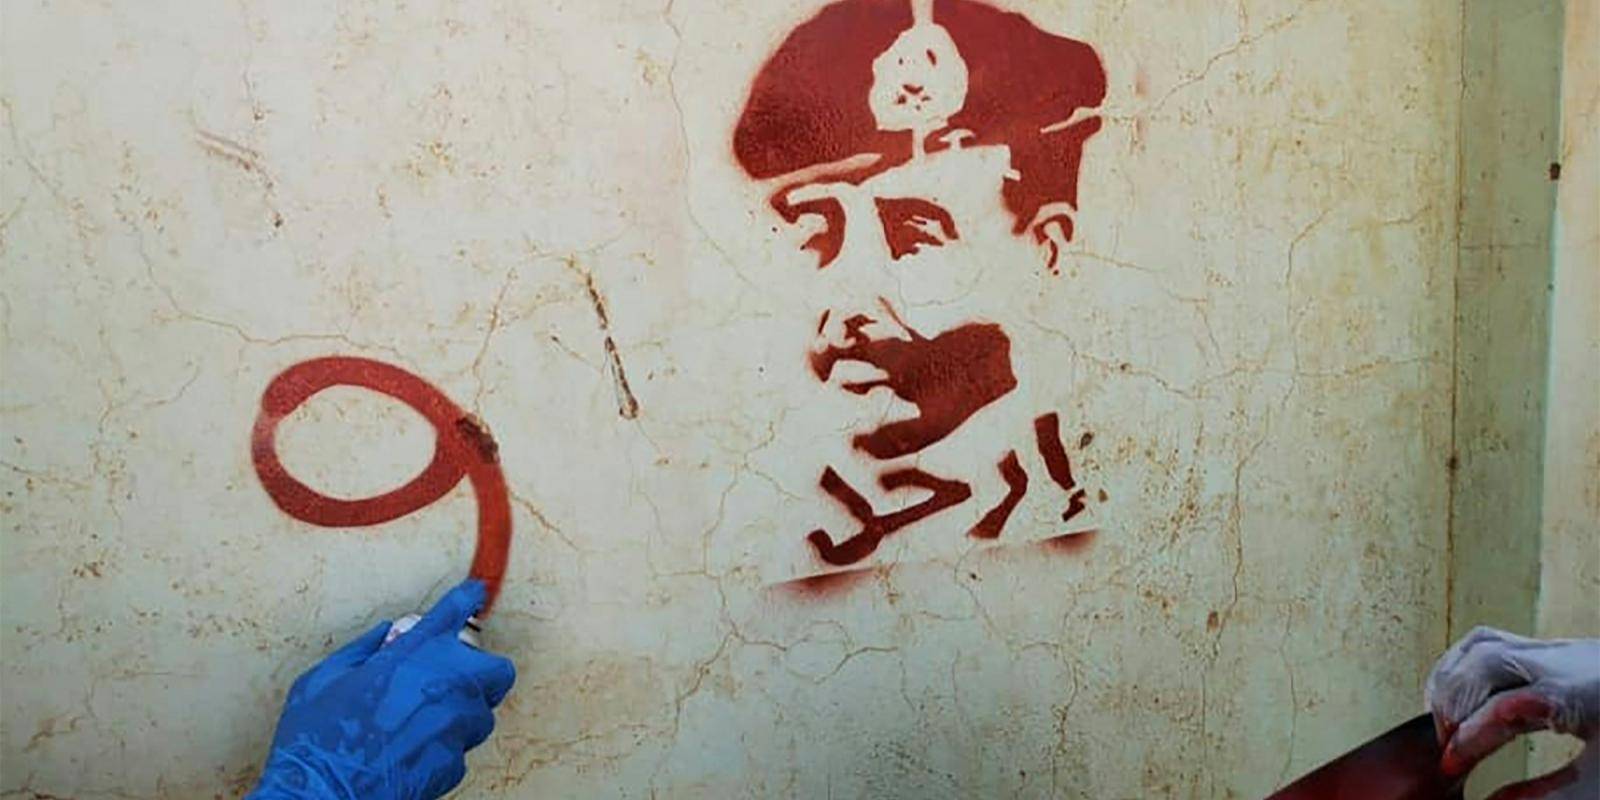 Spraying next to a stencil painting of Sudan's top army general Abdel Fattah al-Burhan with a writing in Arabic that reads 'leave' during a protest in Khartoum against the 2021 military coup. Photo by AFP via Getty Images.